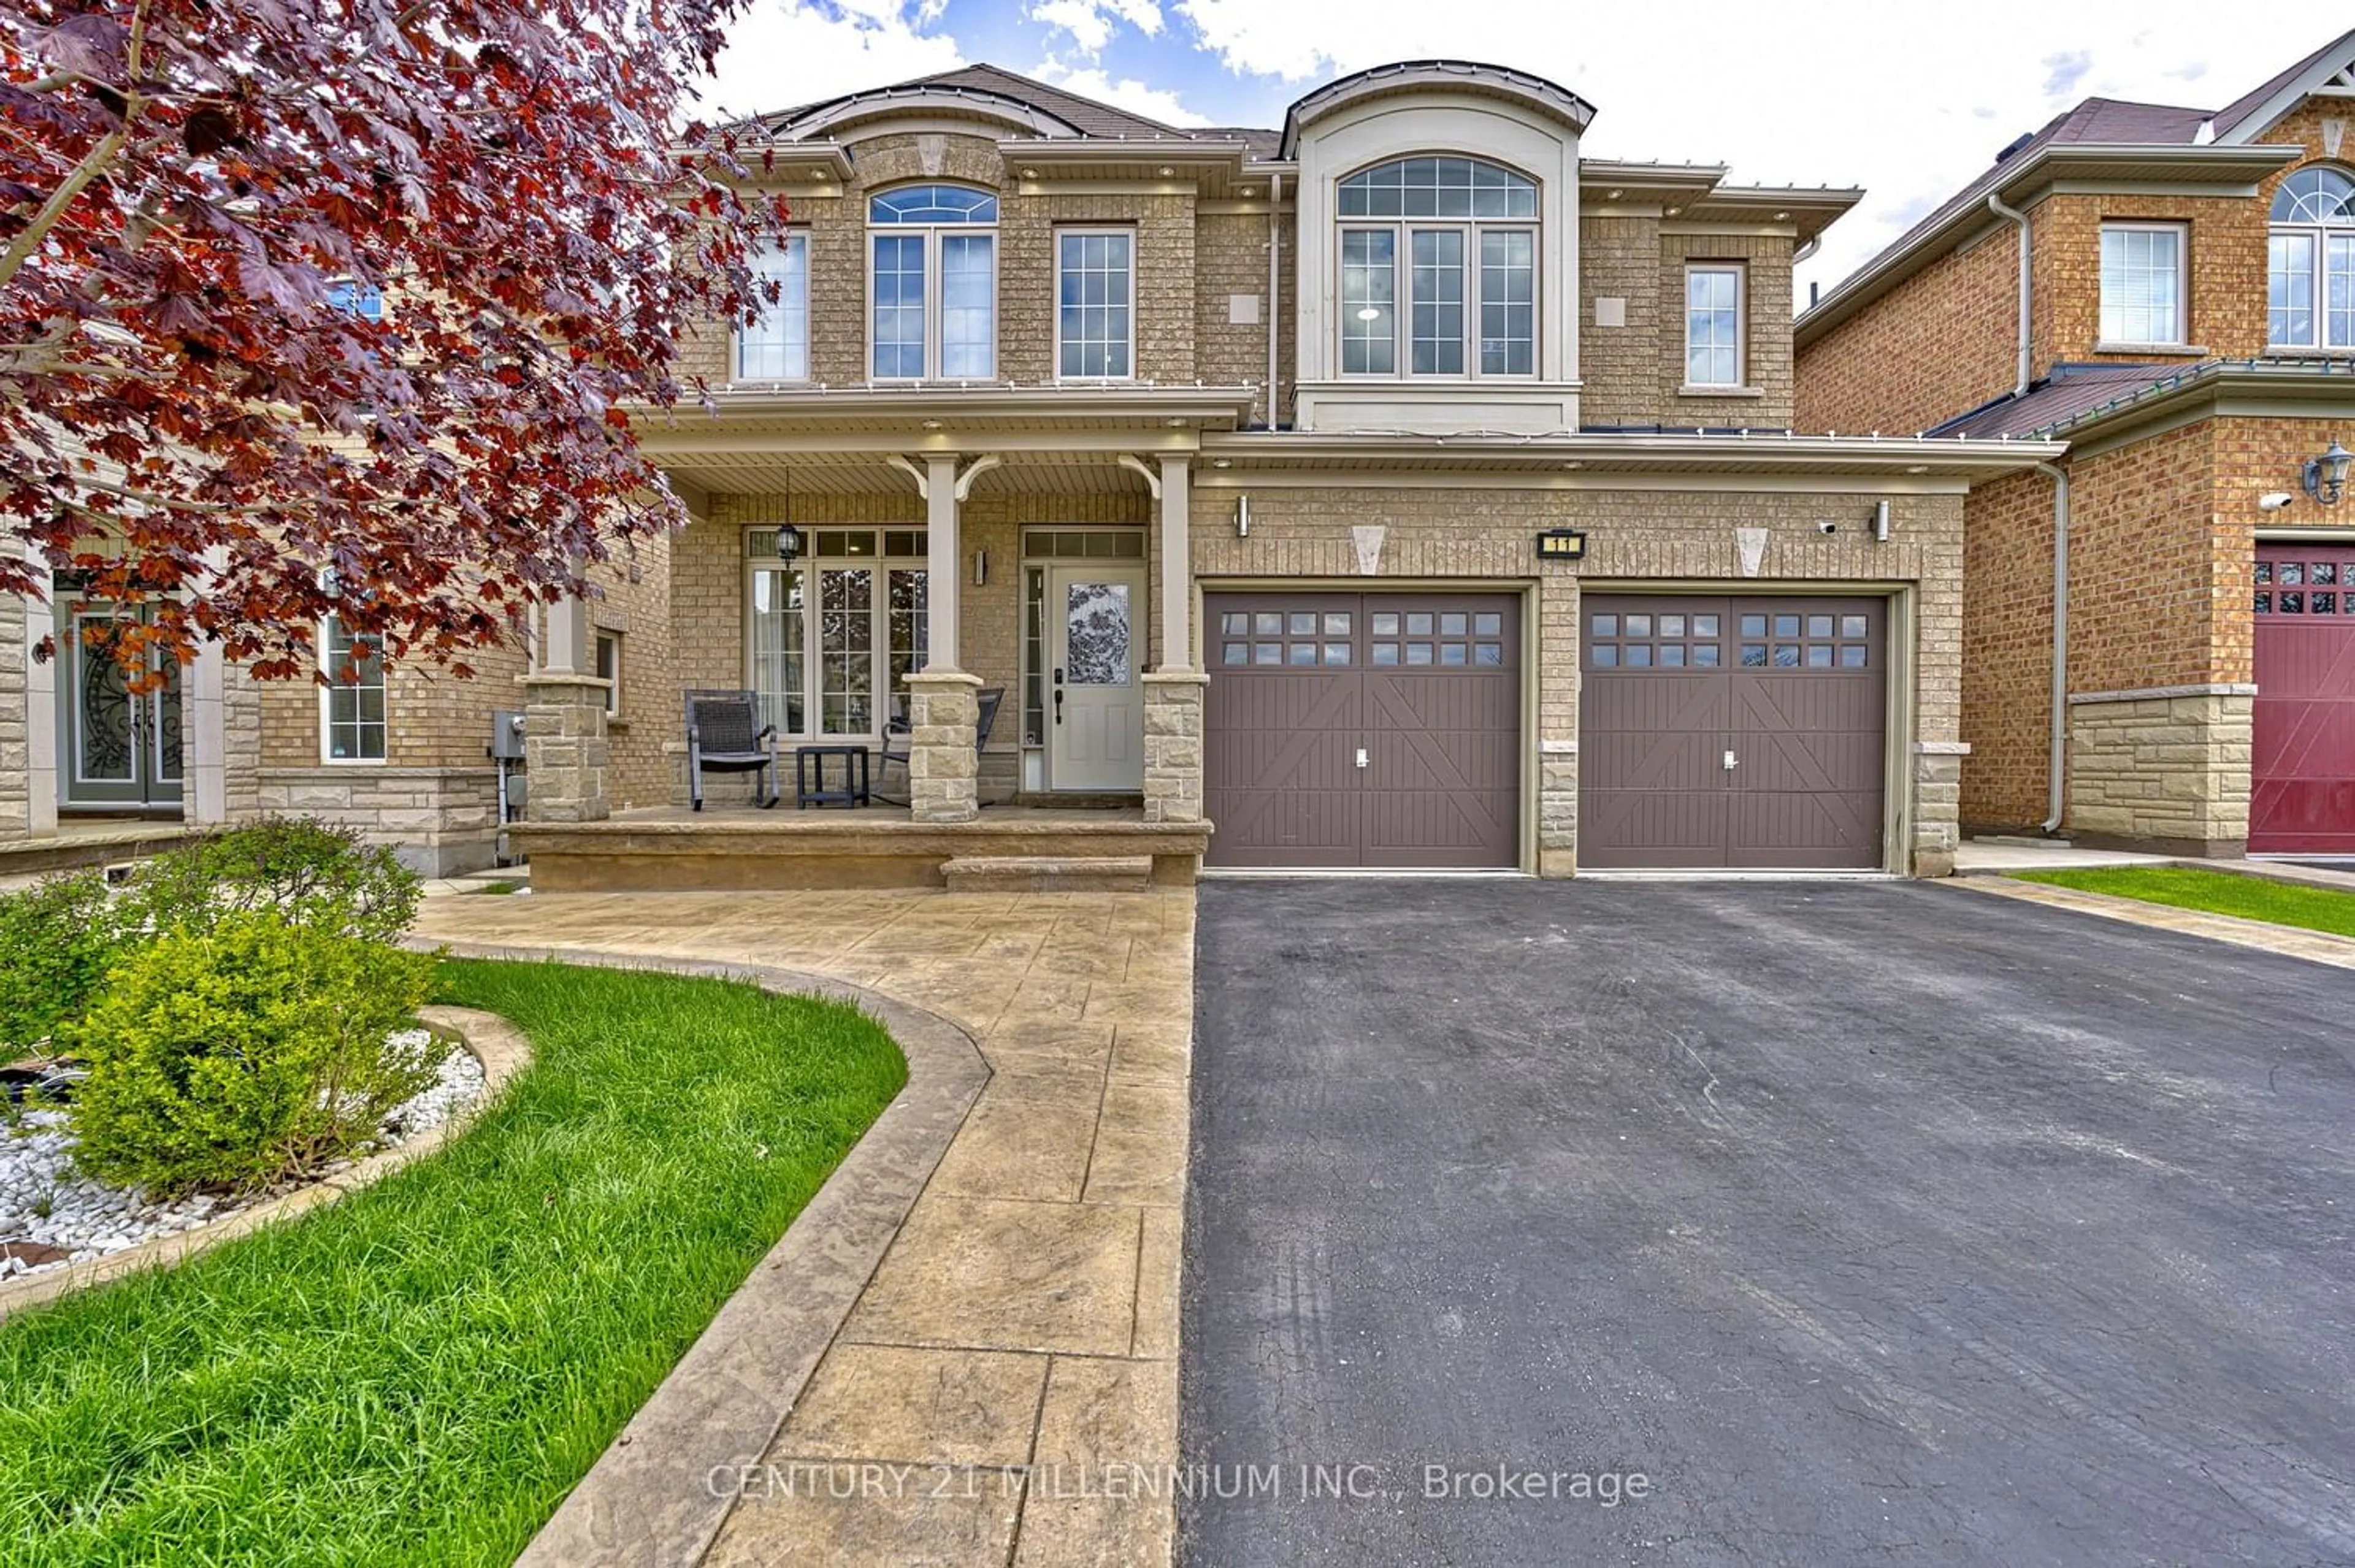 Home with brick exterior material for 11 Maybeck Dr, Brampton Ontario L6X 0Z6